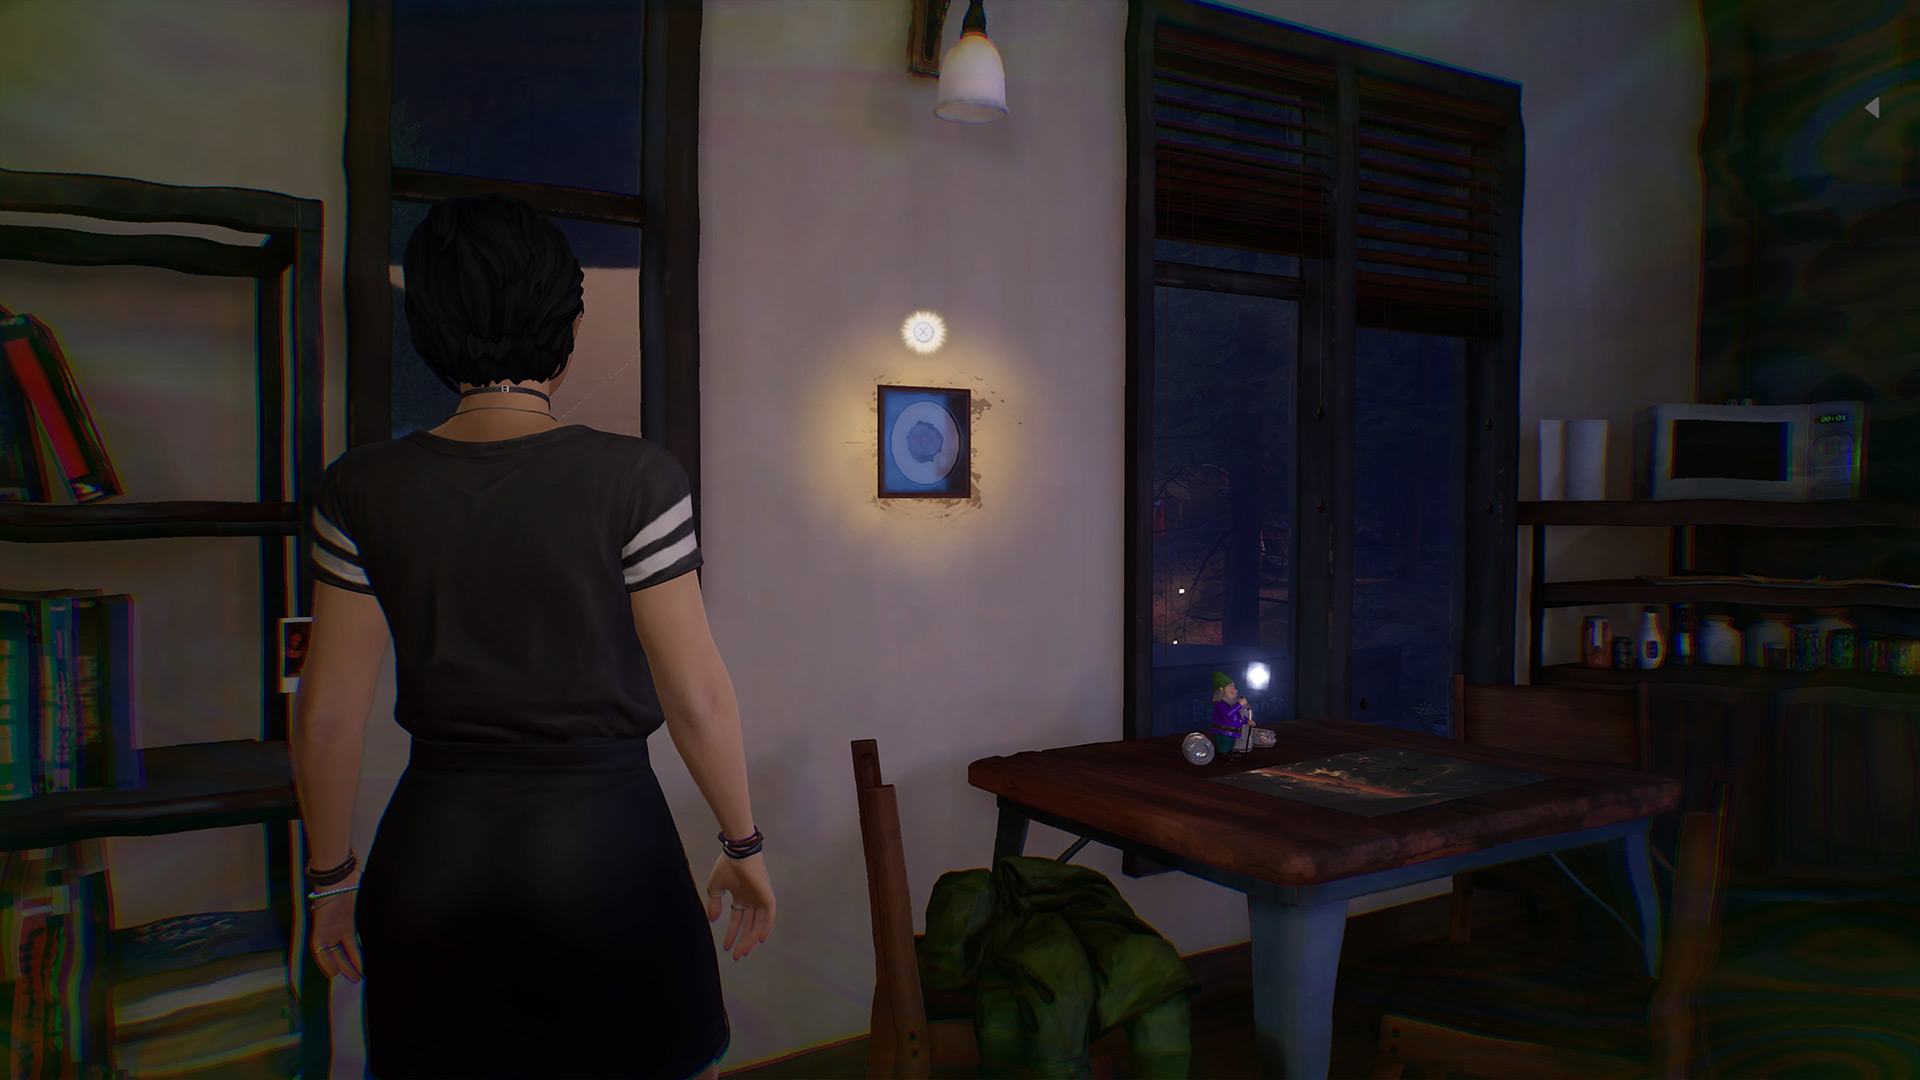 Life is Strange True Colors memory locations: Alex looking at a pressed rose painting on the wall.